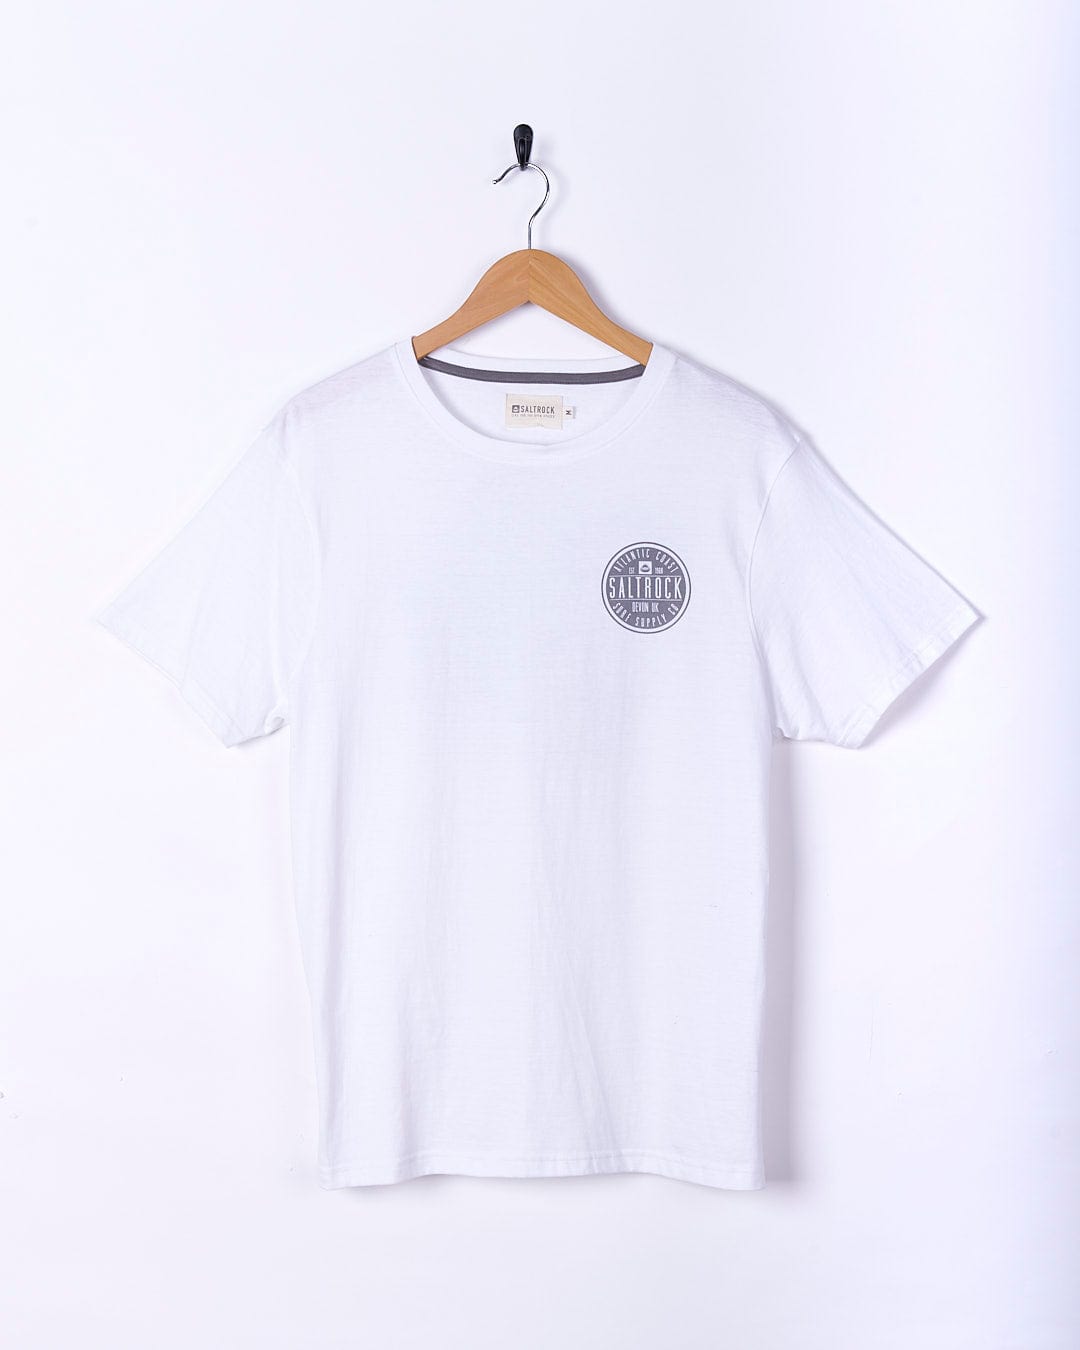 A Saltrock - Mens Short Sleeve T-Shirt - White with a circle on it.